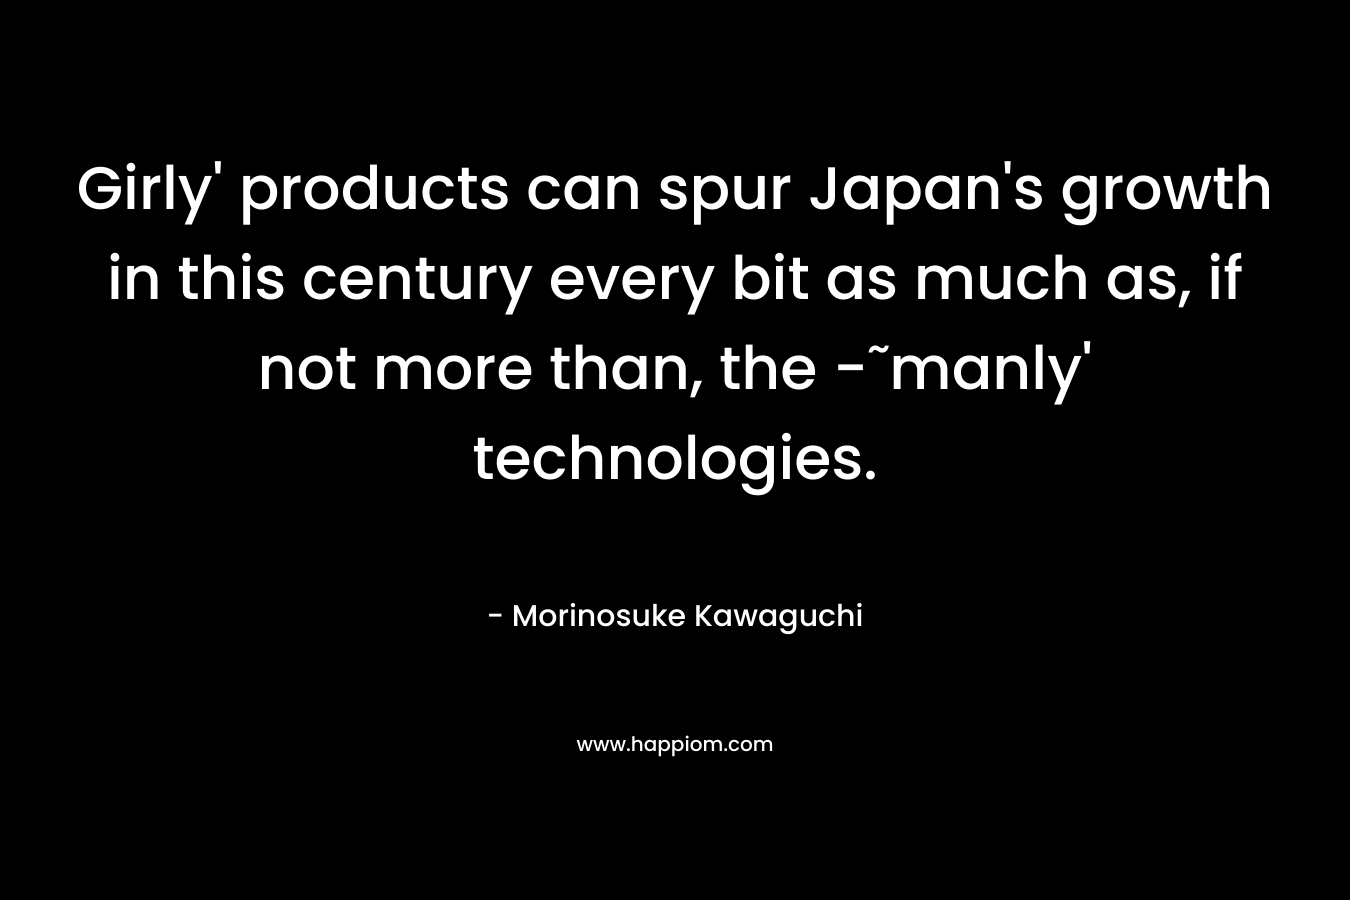 Girly’ products can spur Japan’s growth in this century every bit as much as, if not more than, the -˜manly’ technologies. – Morinosuke Kawaguchi